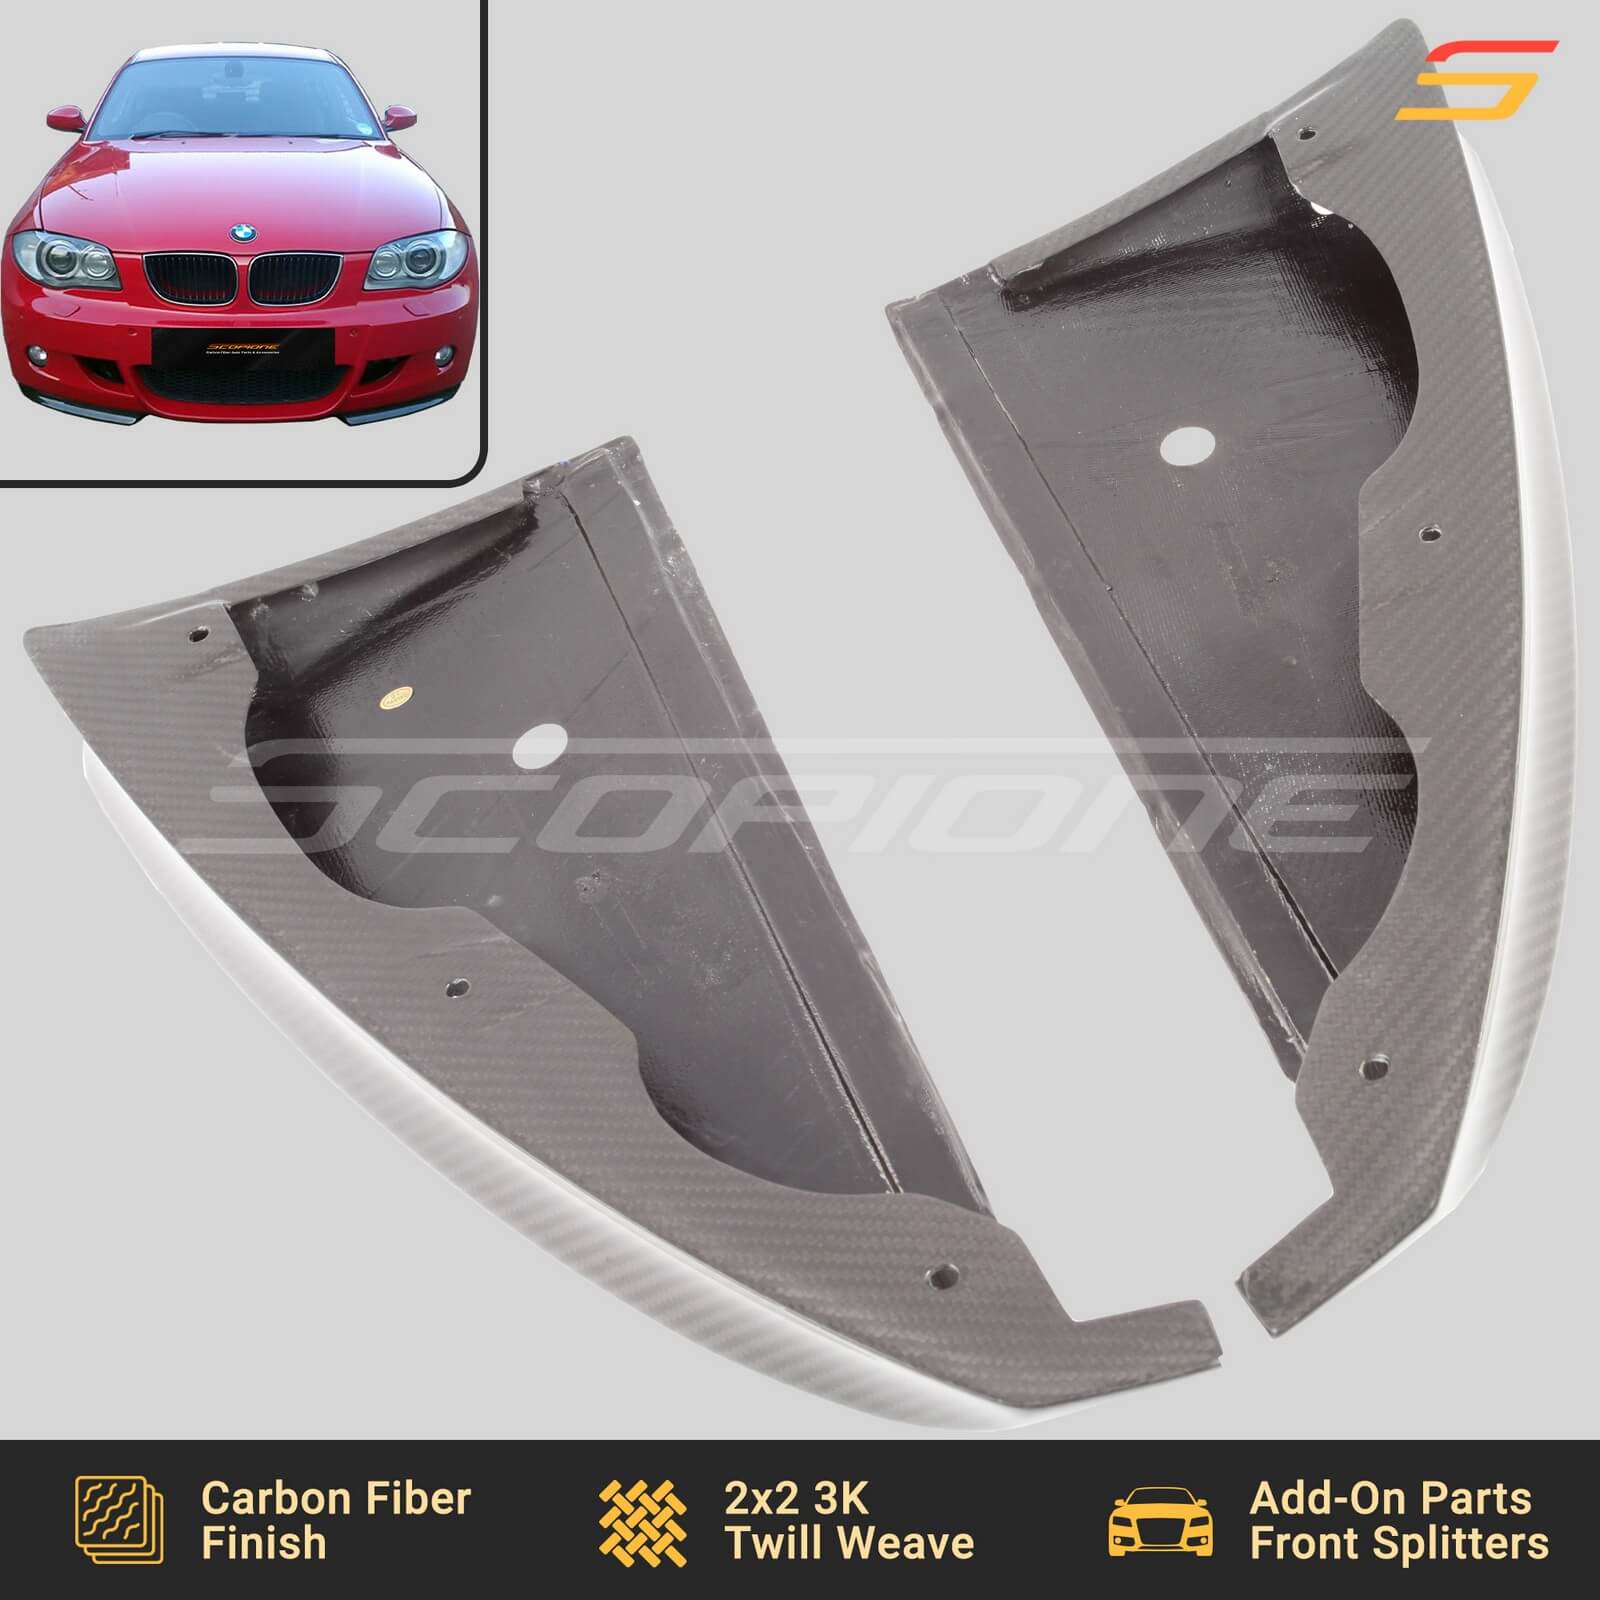 Bodykits and spoilers for BMW E87 1-Series - SC Styling